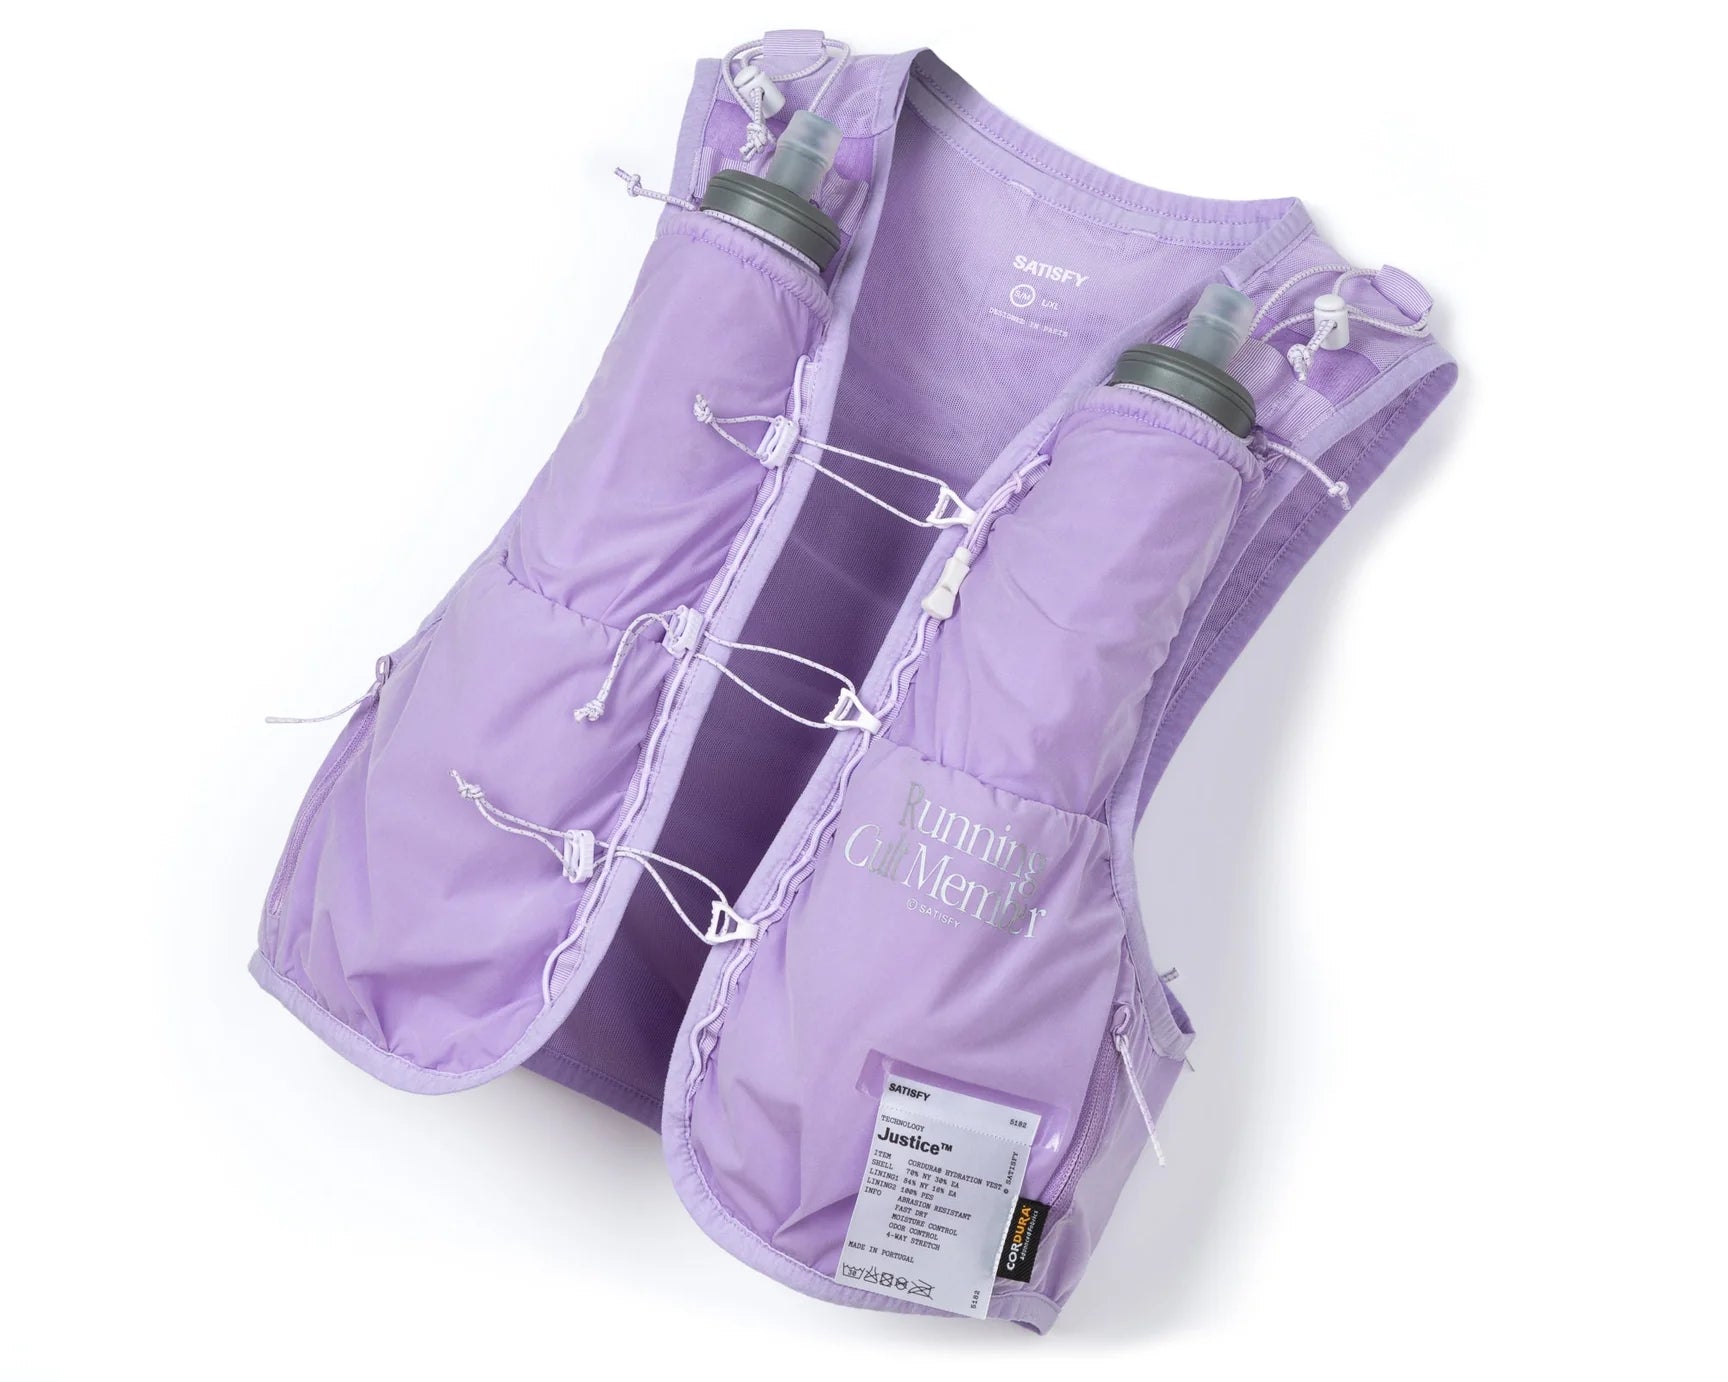 SATISFY - Justice Cordura 5L Hydration Vest - Mineral Lilac - Space Camp